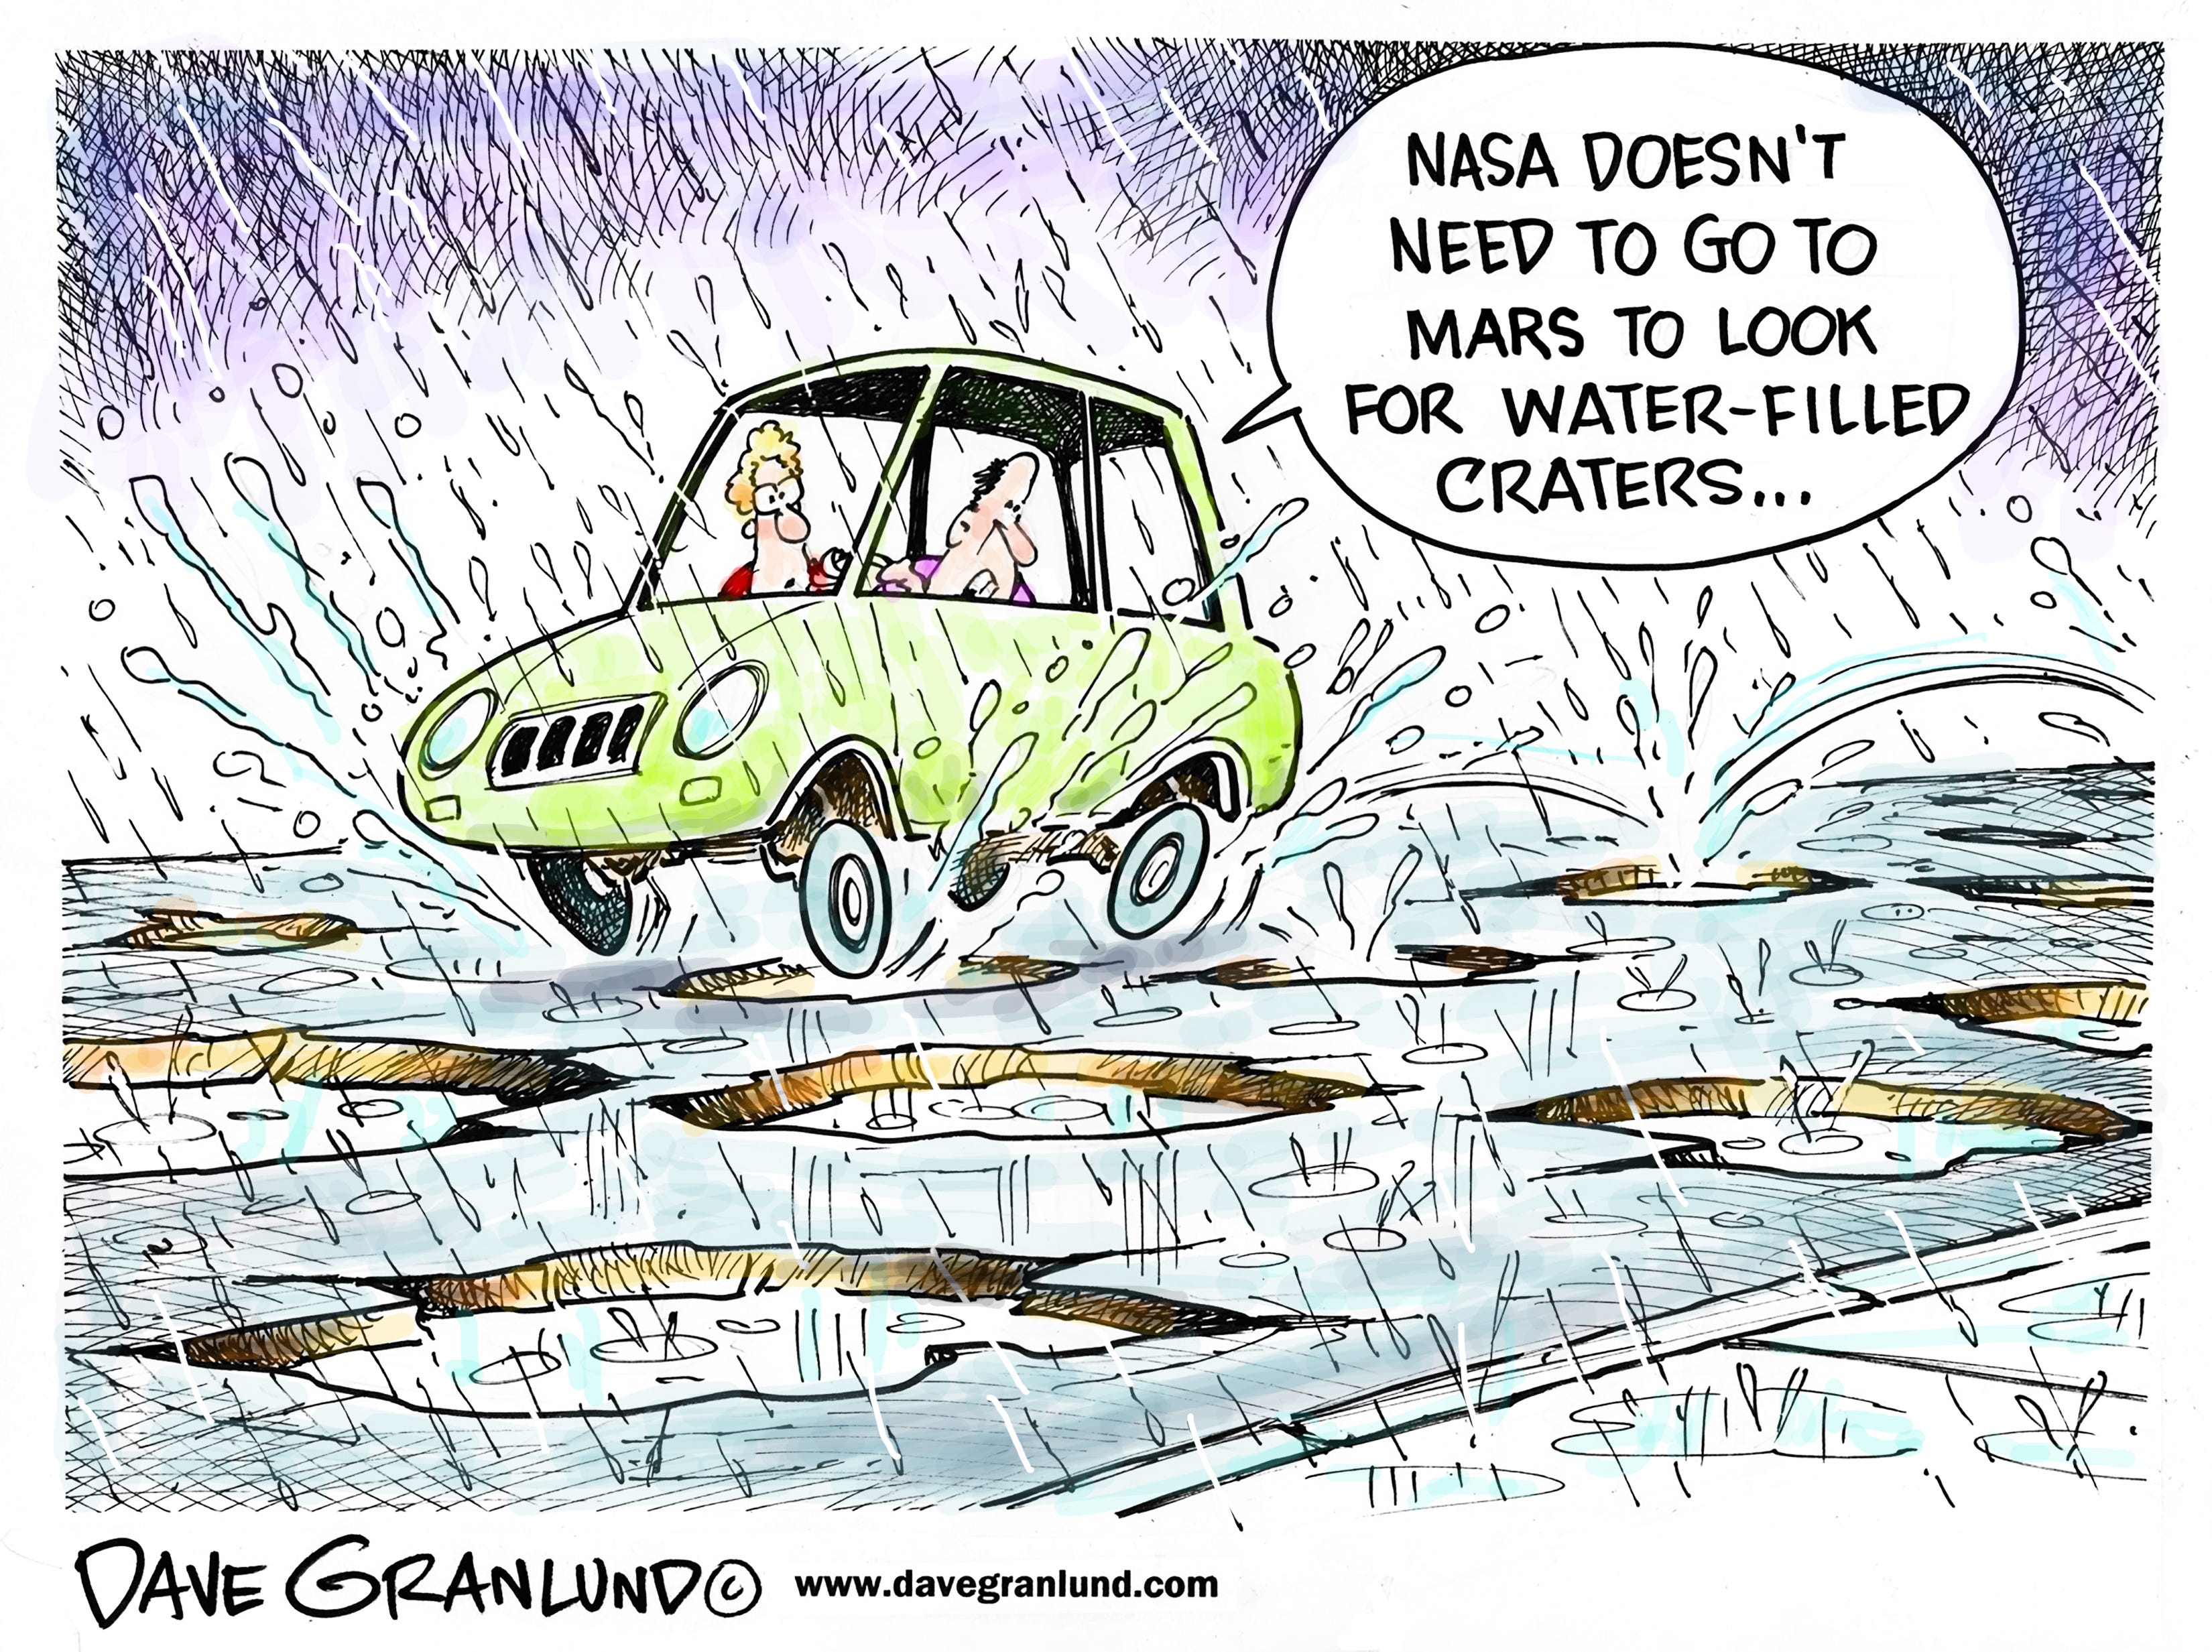 Granlund cartoon: Water-filled craters